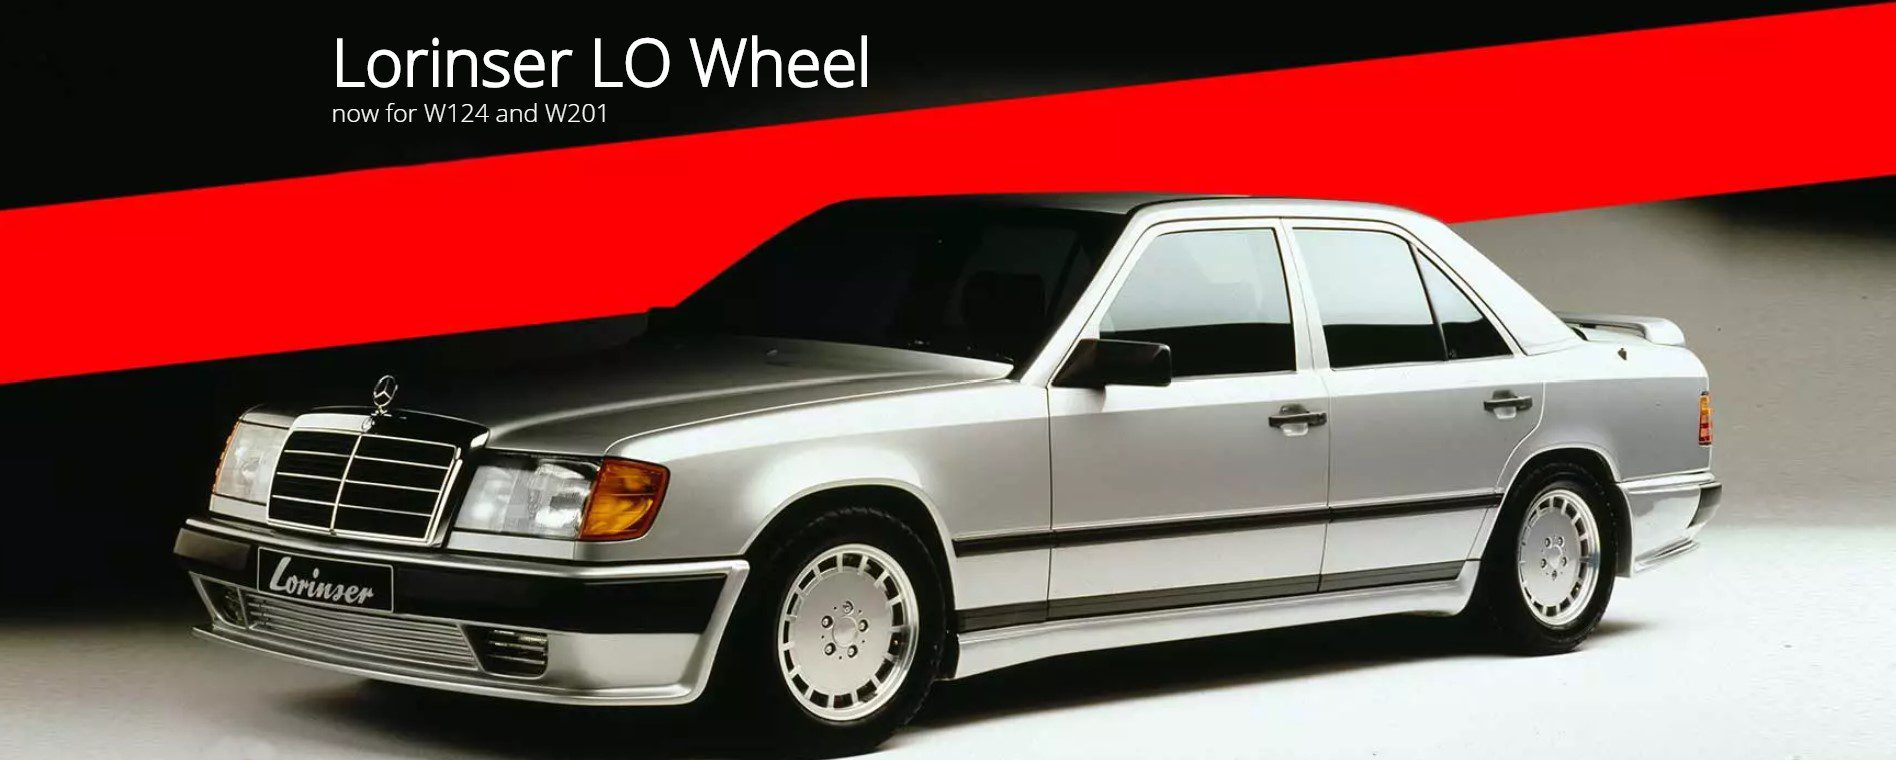 W124 and W201 Lorinser LO Wheels